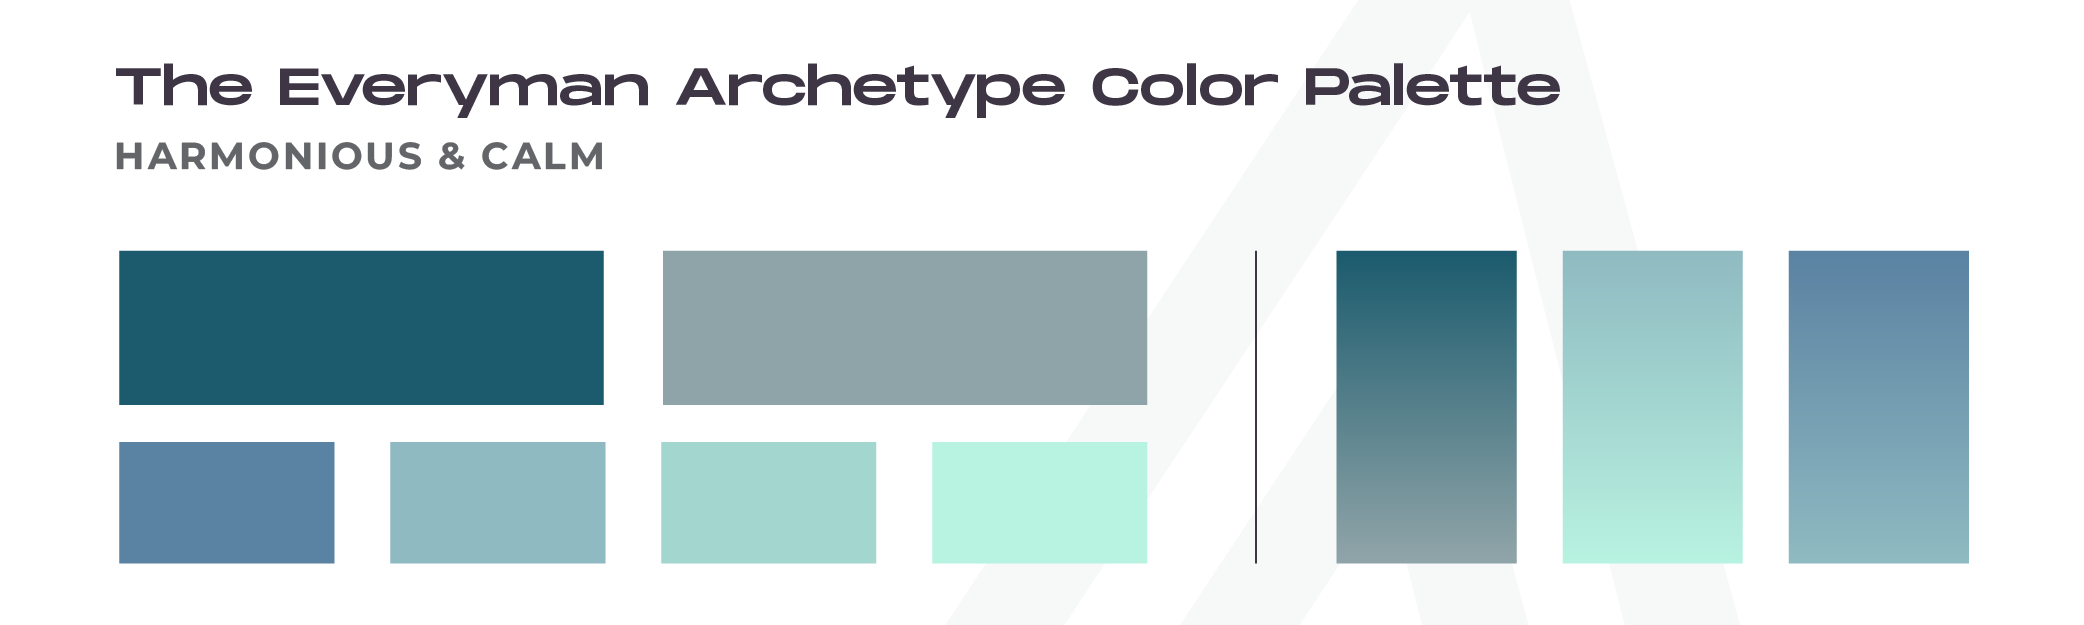 Brand Archetypes Color Palettes_The Everyman